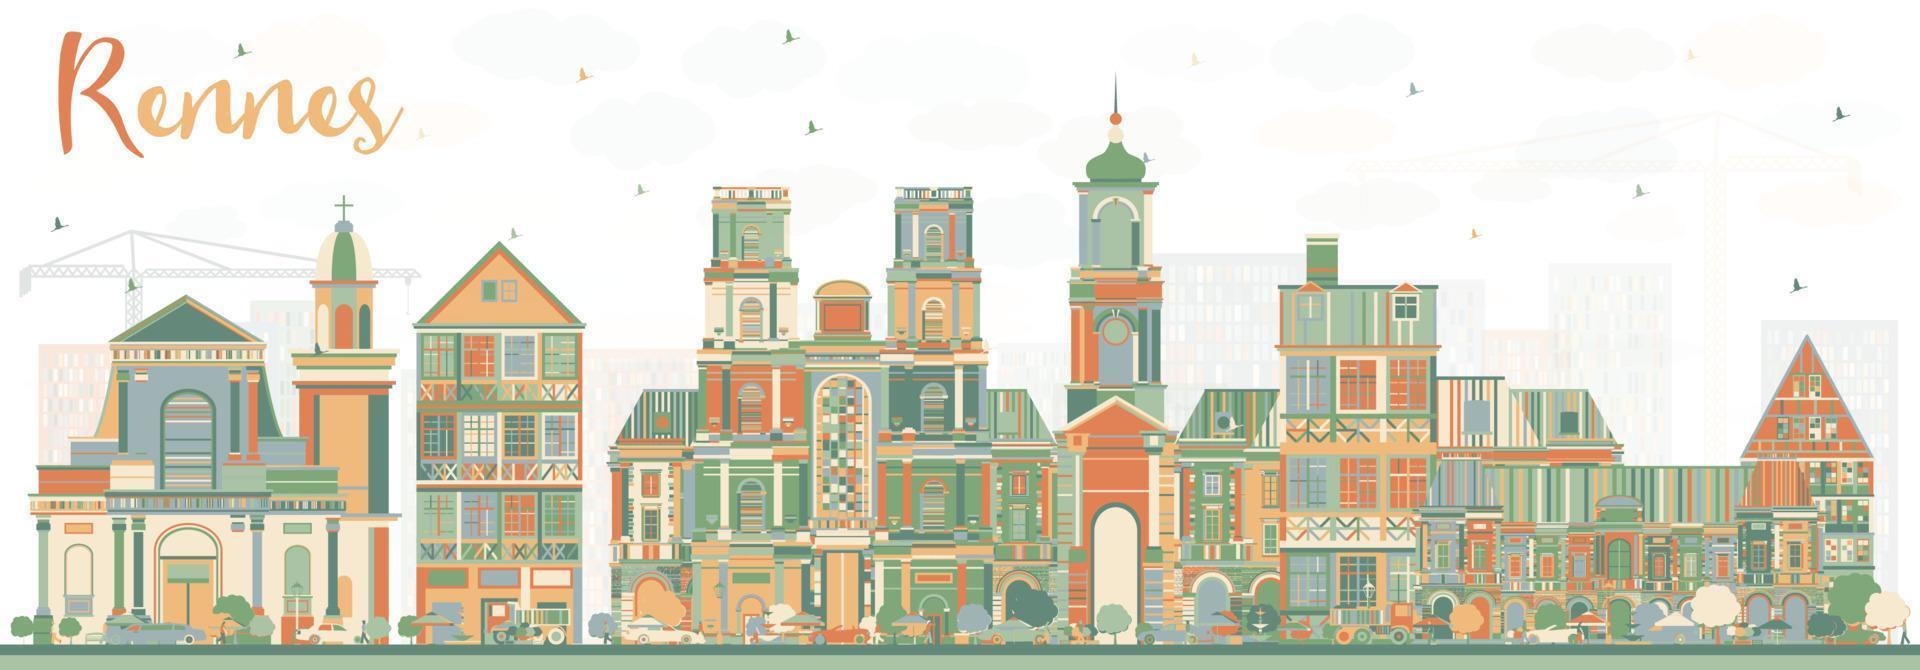 Rennes France City Skyline with Color Buildings. vector